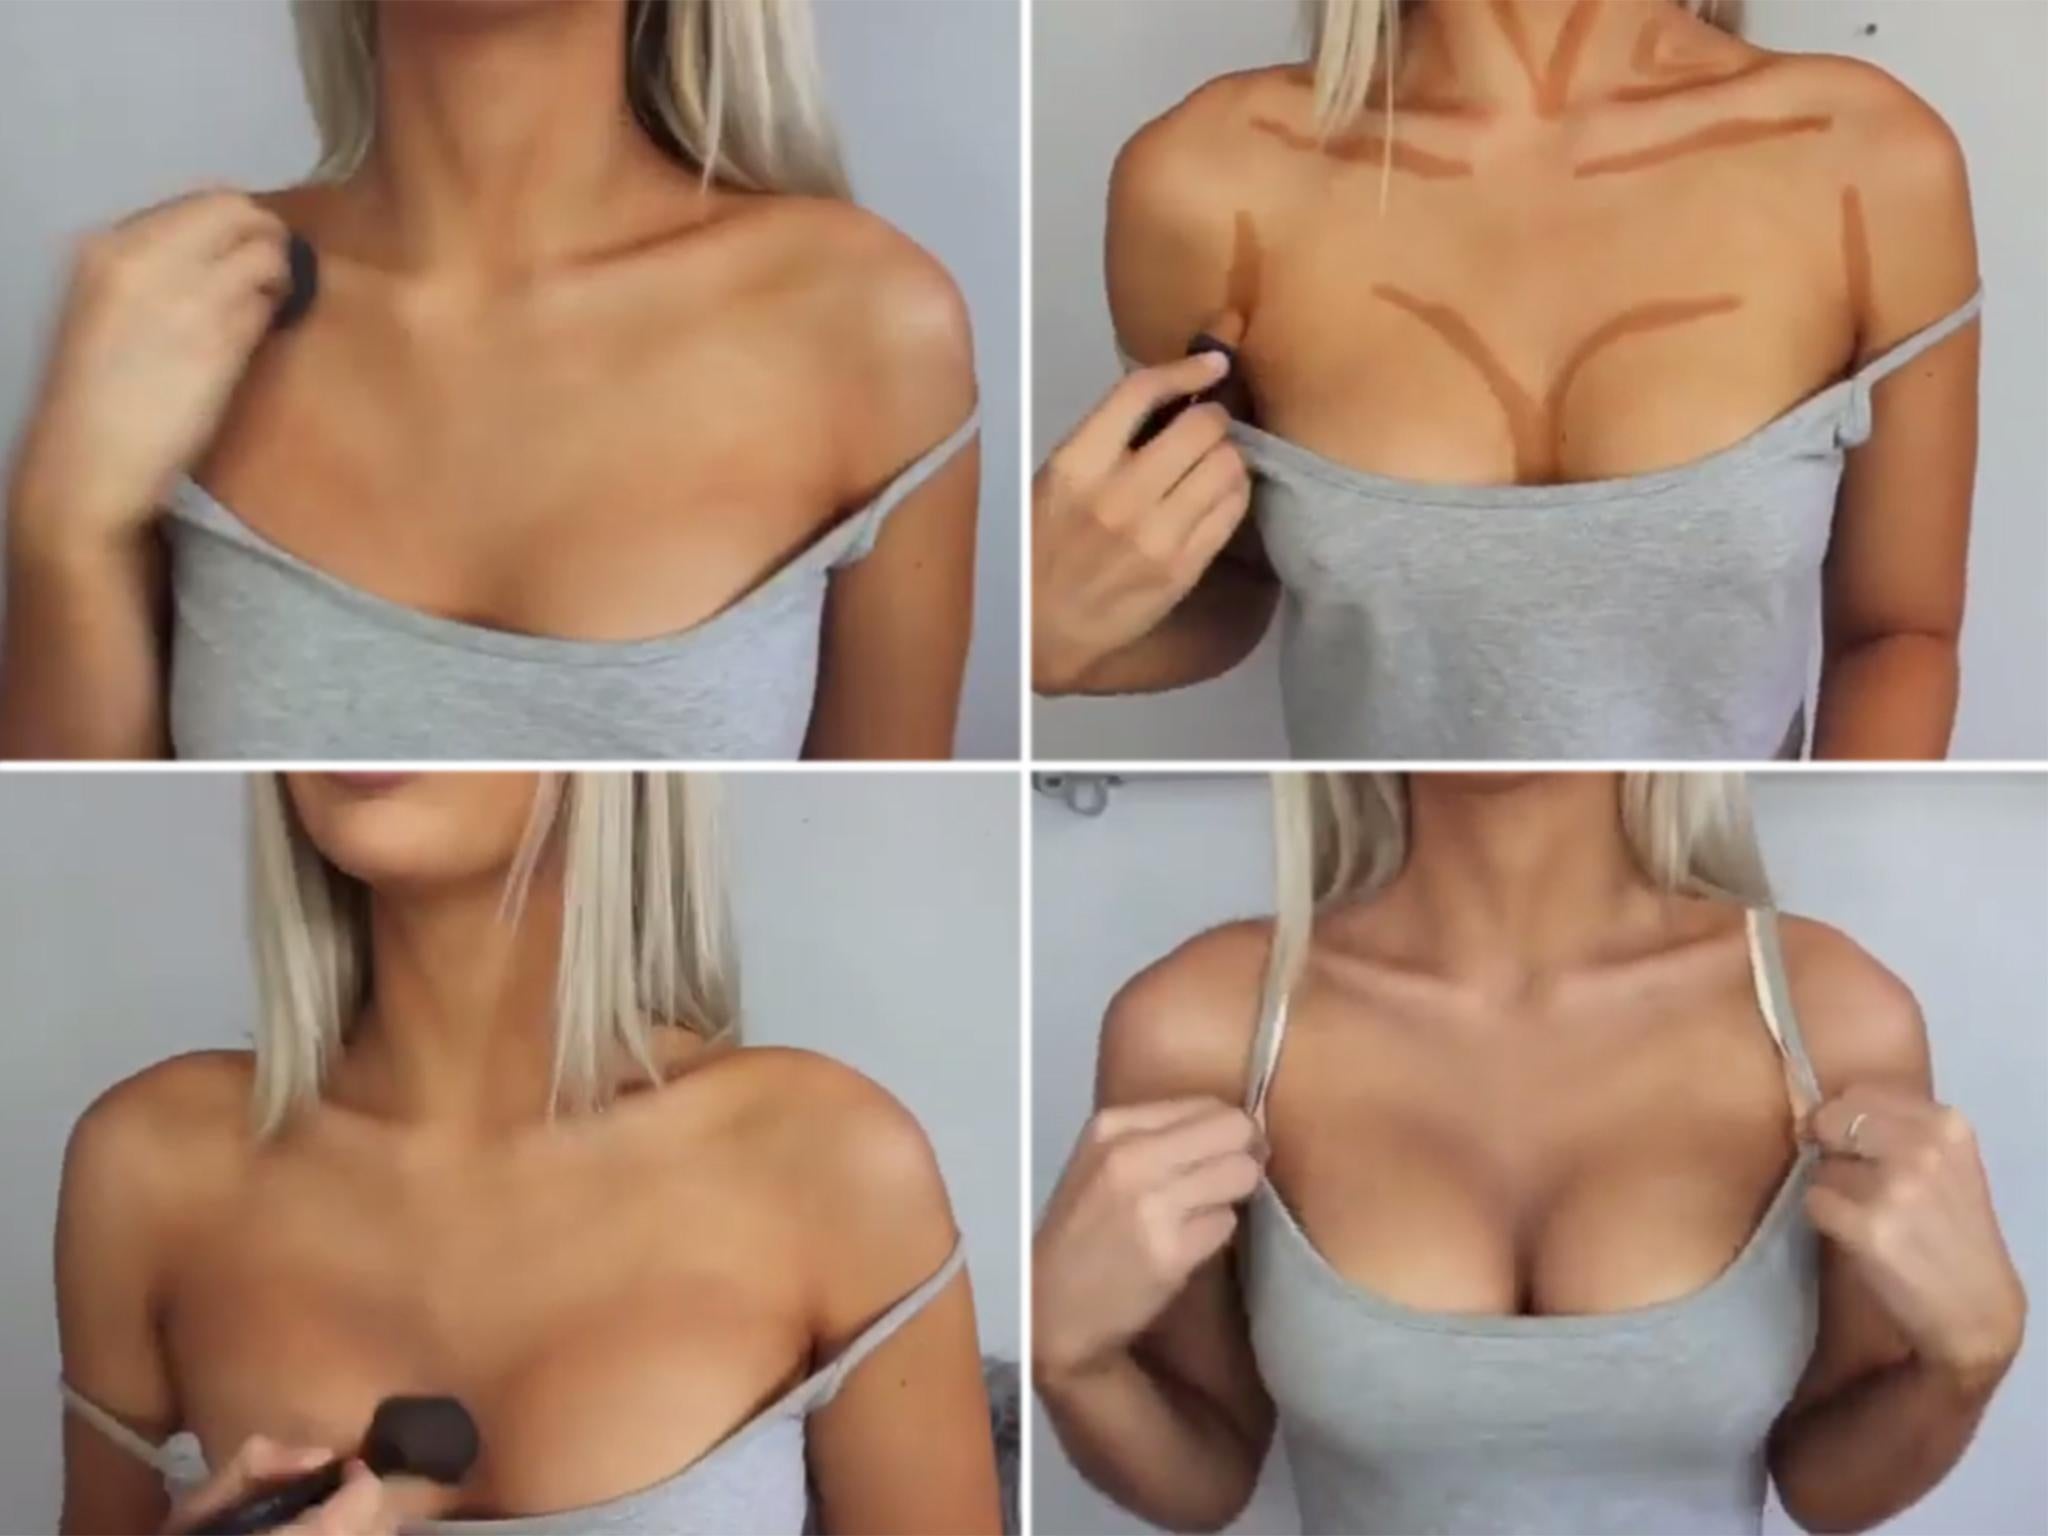 https://static.independent.co.uk/s3fs-public/thumbnails/image/2016/10/03/13/breast-contouring.jpg